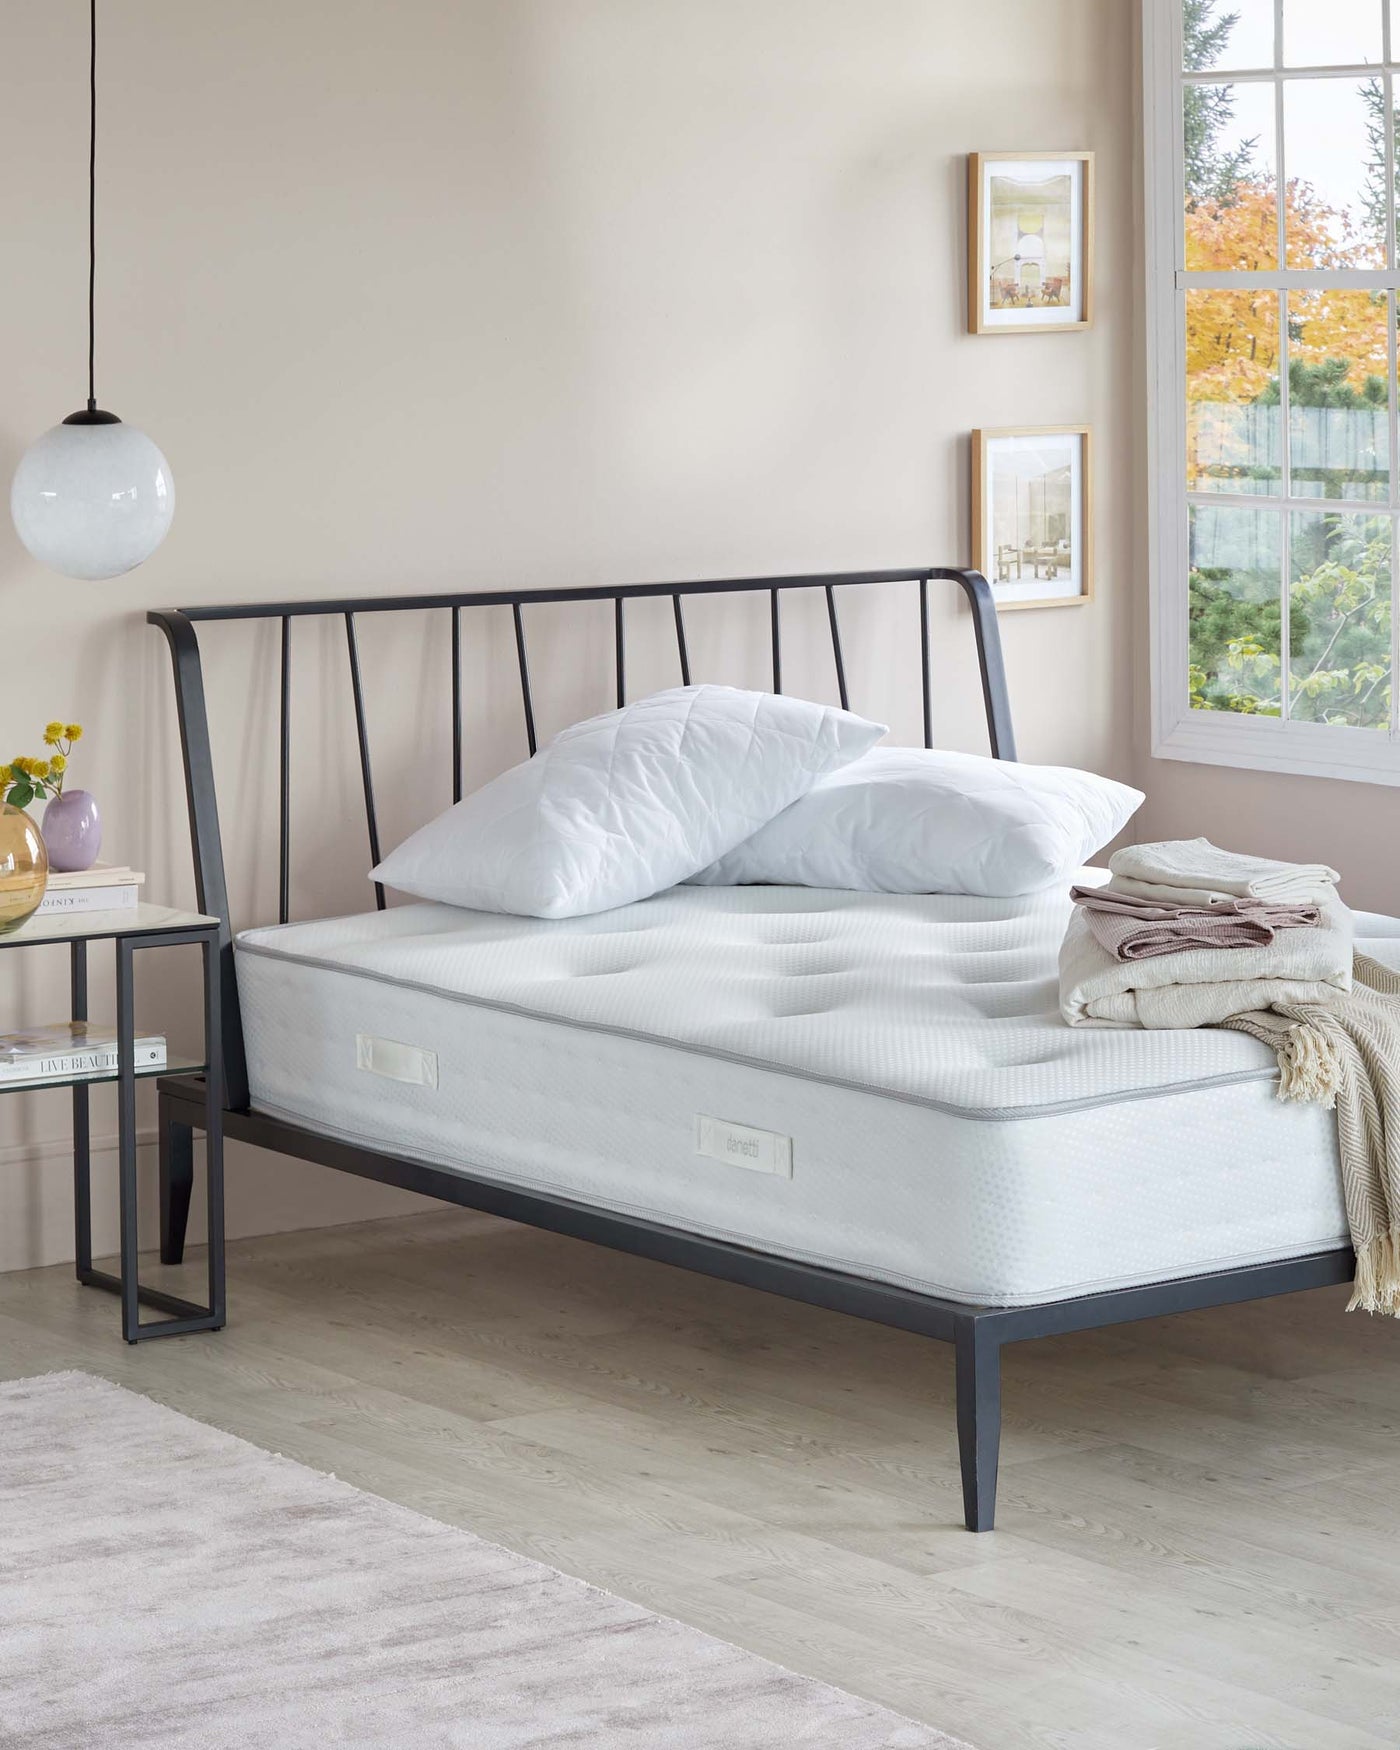 A modern minimalist metal bed frame with a dark finish, featuring a headboard with vertical bar design, complemented by a white textured mattress. Next to the bed is a sleek, slender, black metal nightstand with glass shelves, displaying books and decorative items.